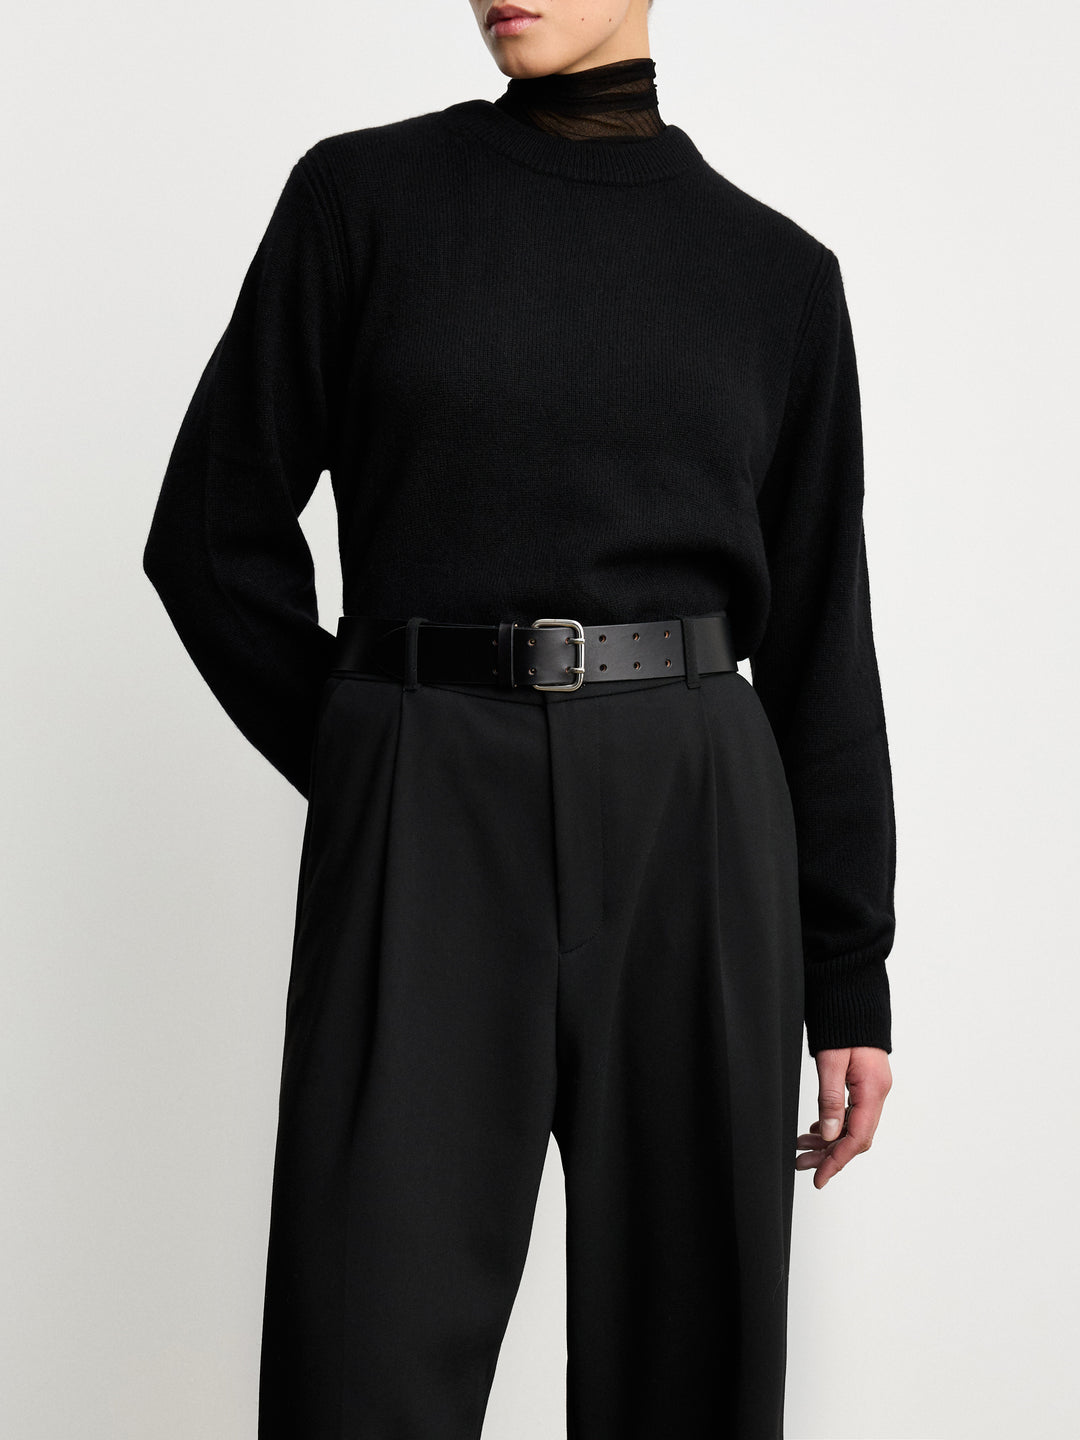 Déhanche Hutch Leather Belt - Classic black leather belt with silver buckle, paired with black trousers and a black sweater. Ideal for a sophisticated, monochromatic look.